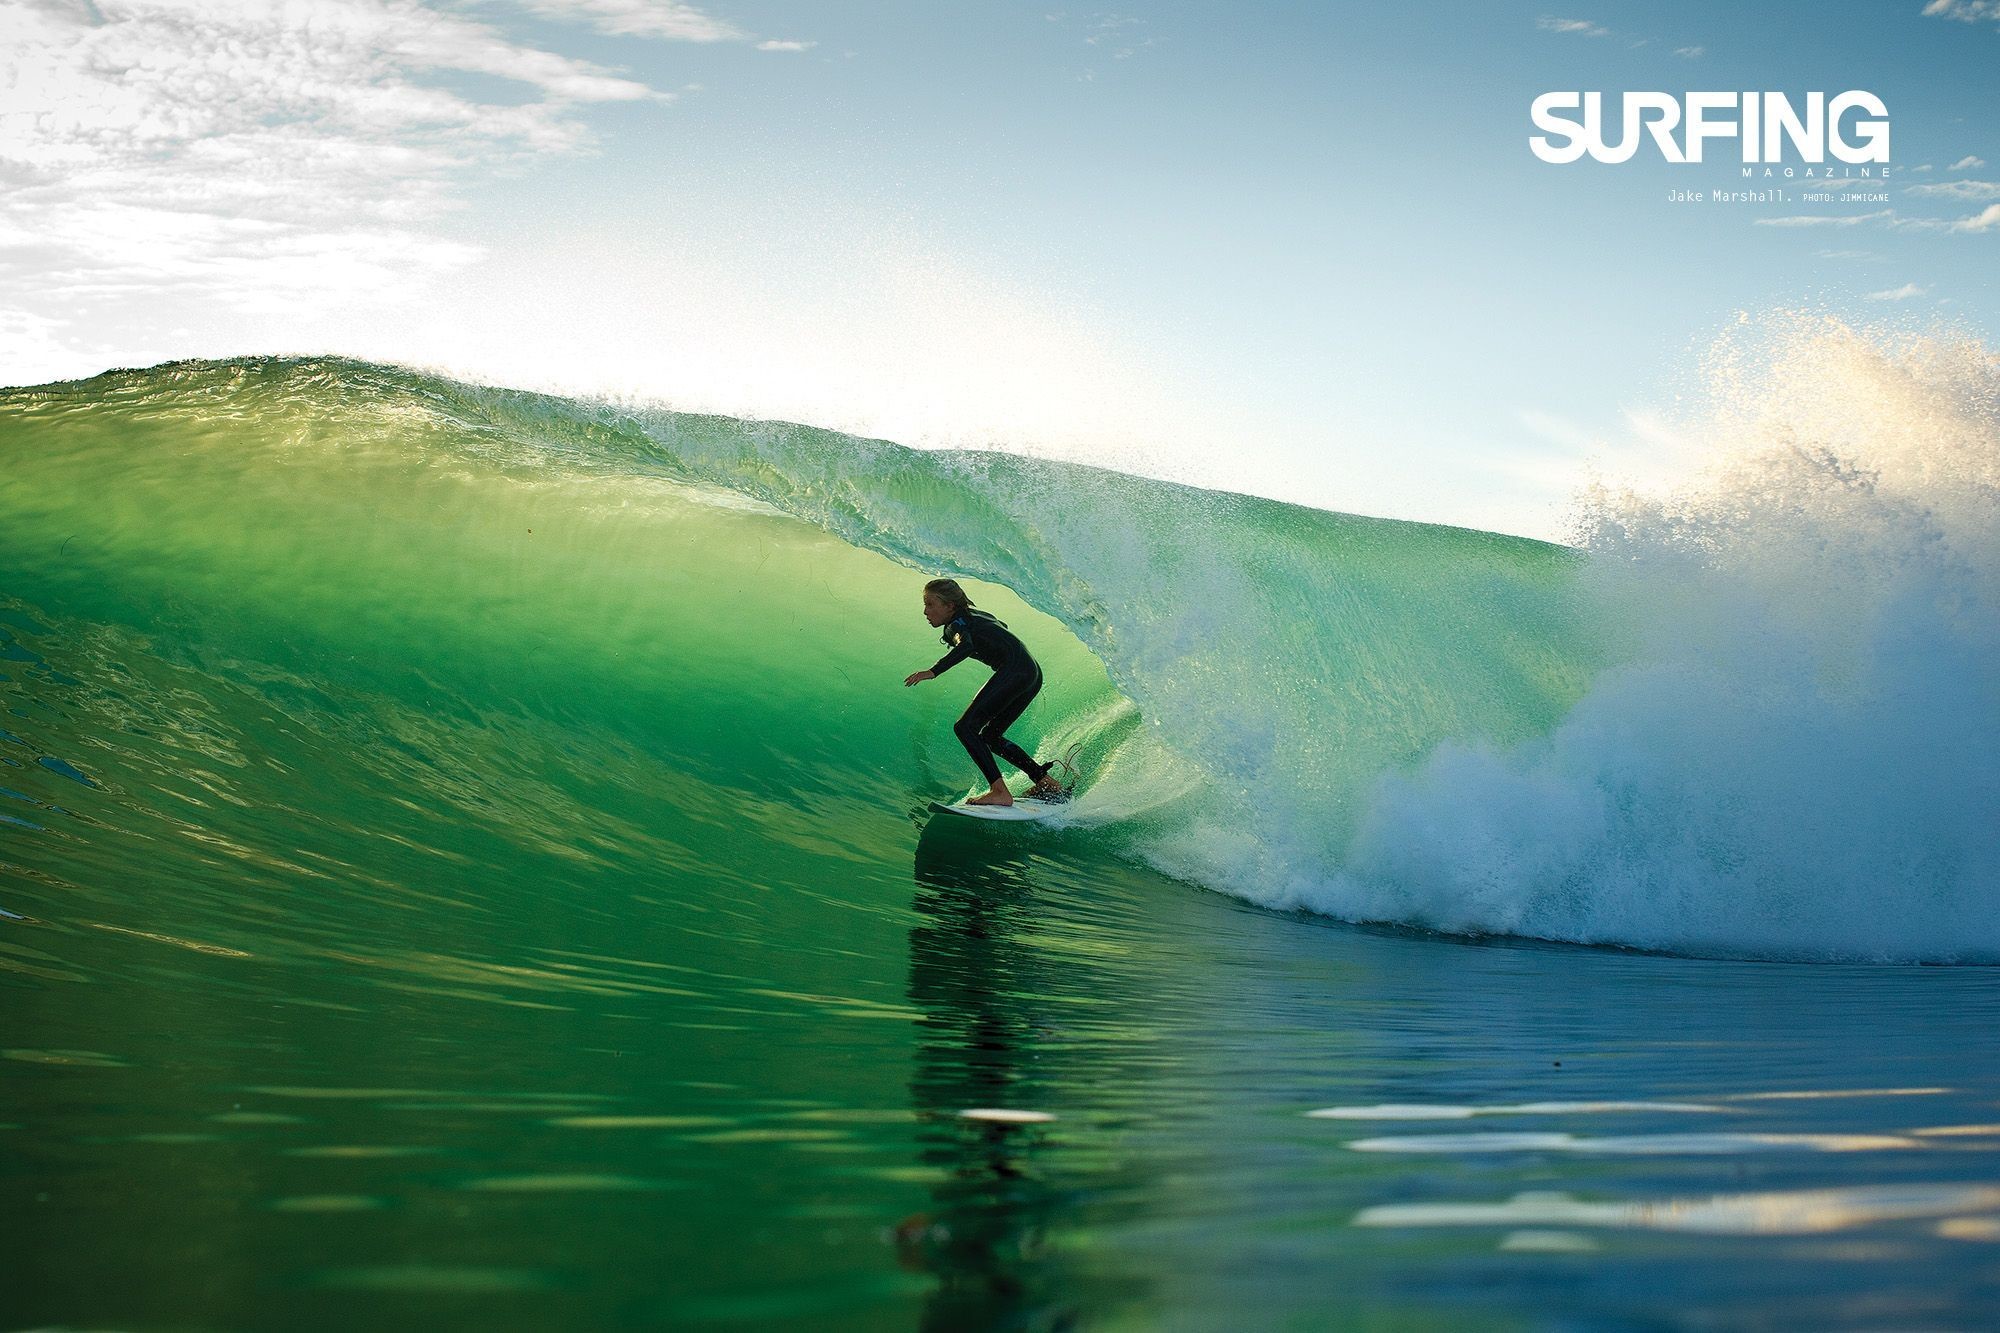 2000x1333 77 entries in Surfer Wallpapers group